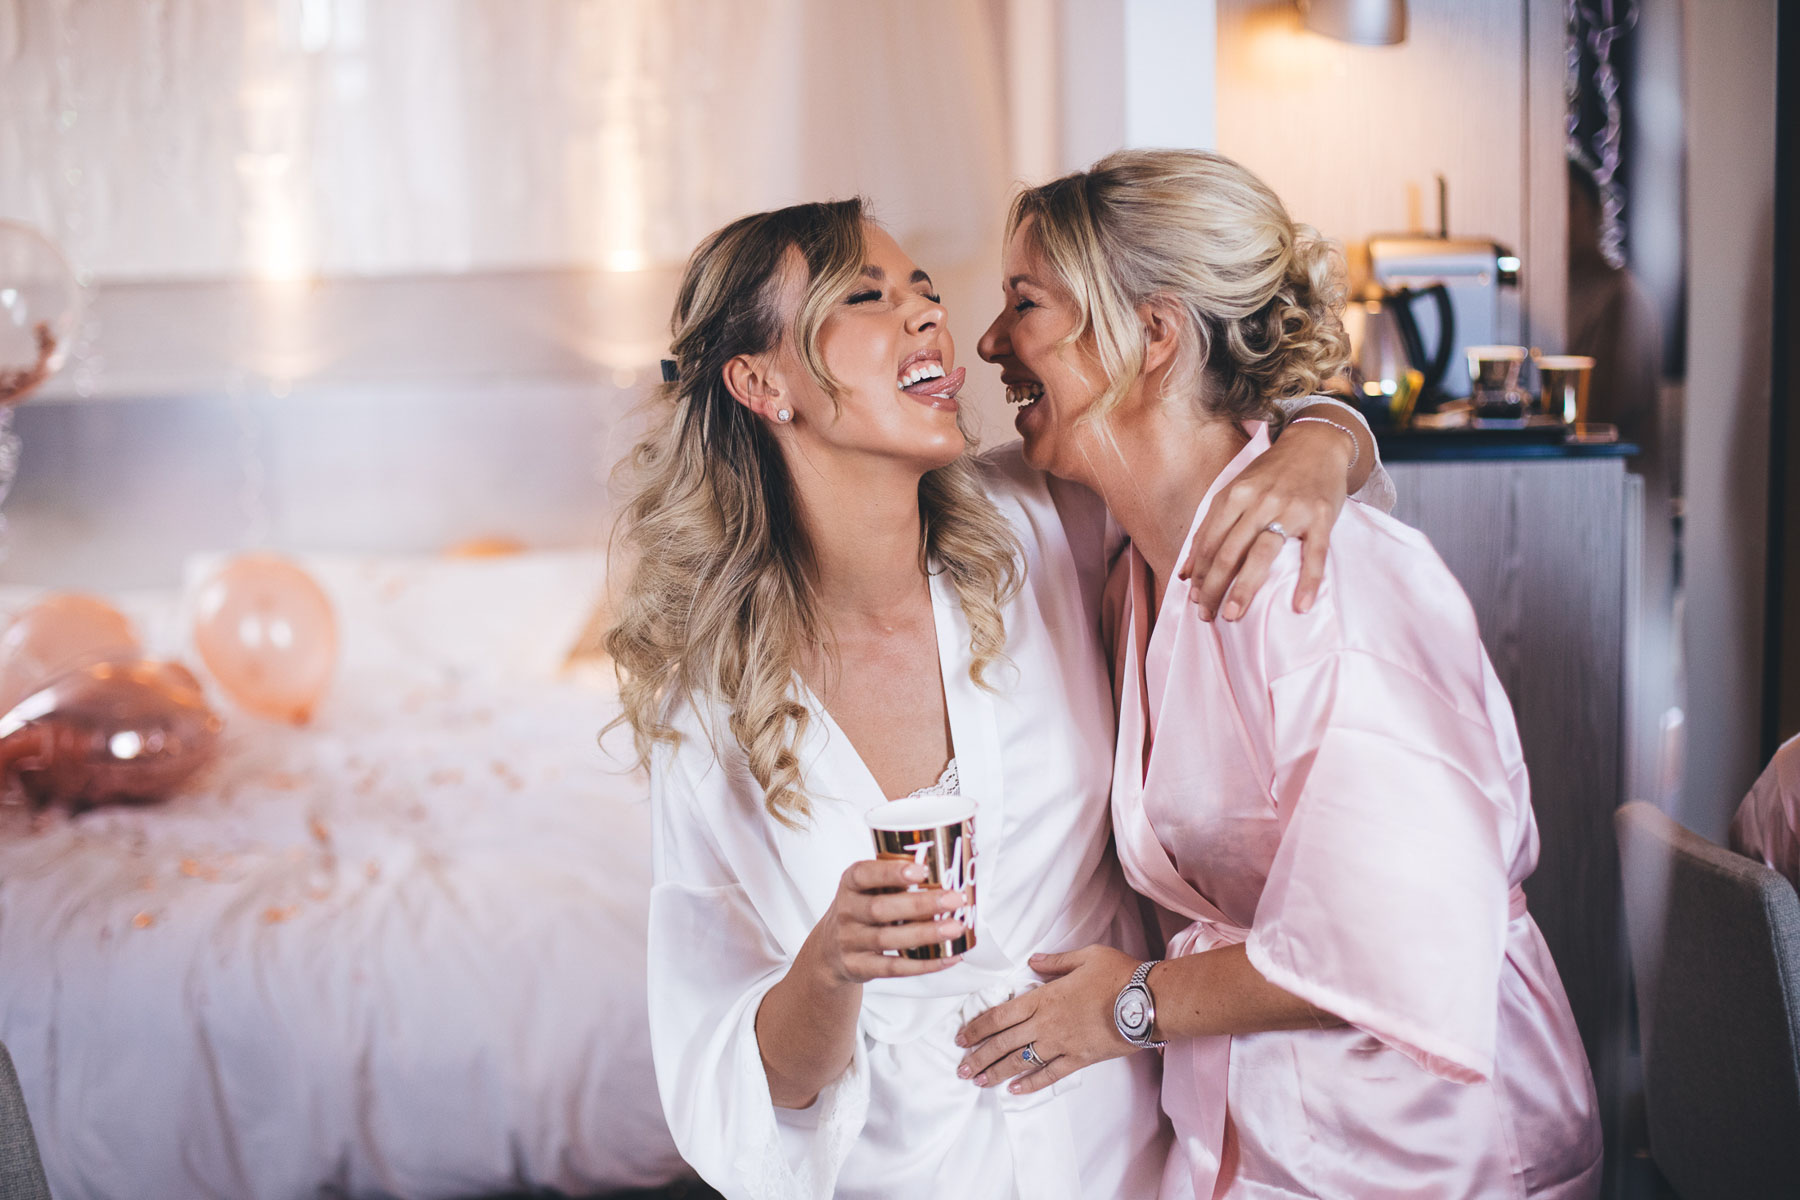 bride goes to lick her friend at bridal prep in a hilarious moment between friends